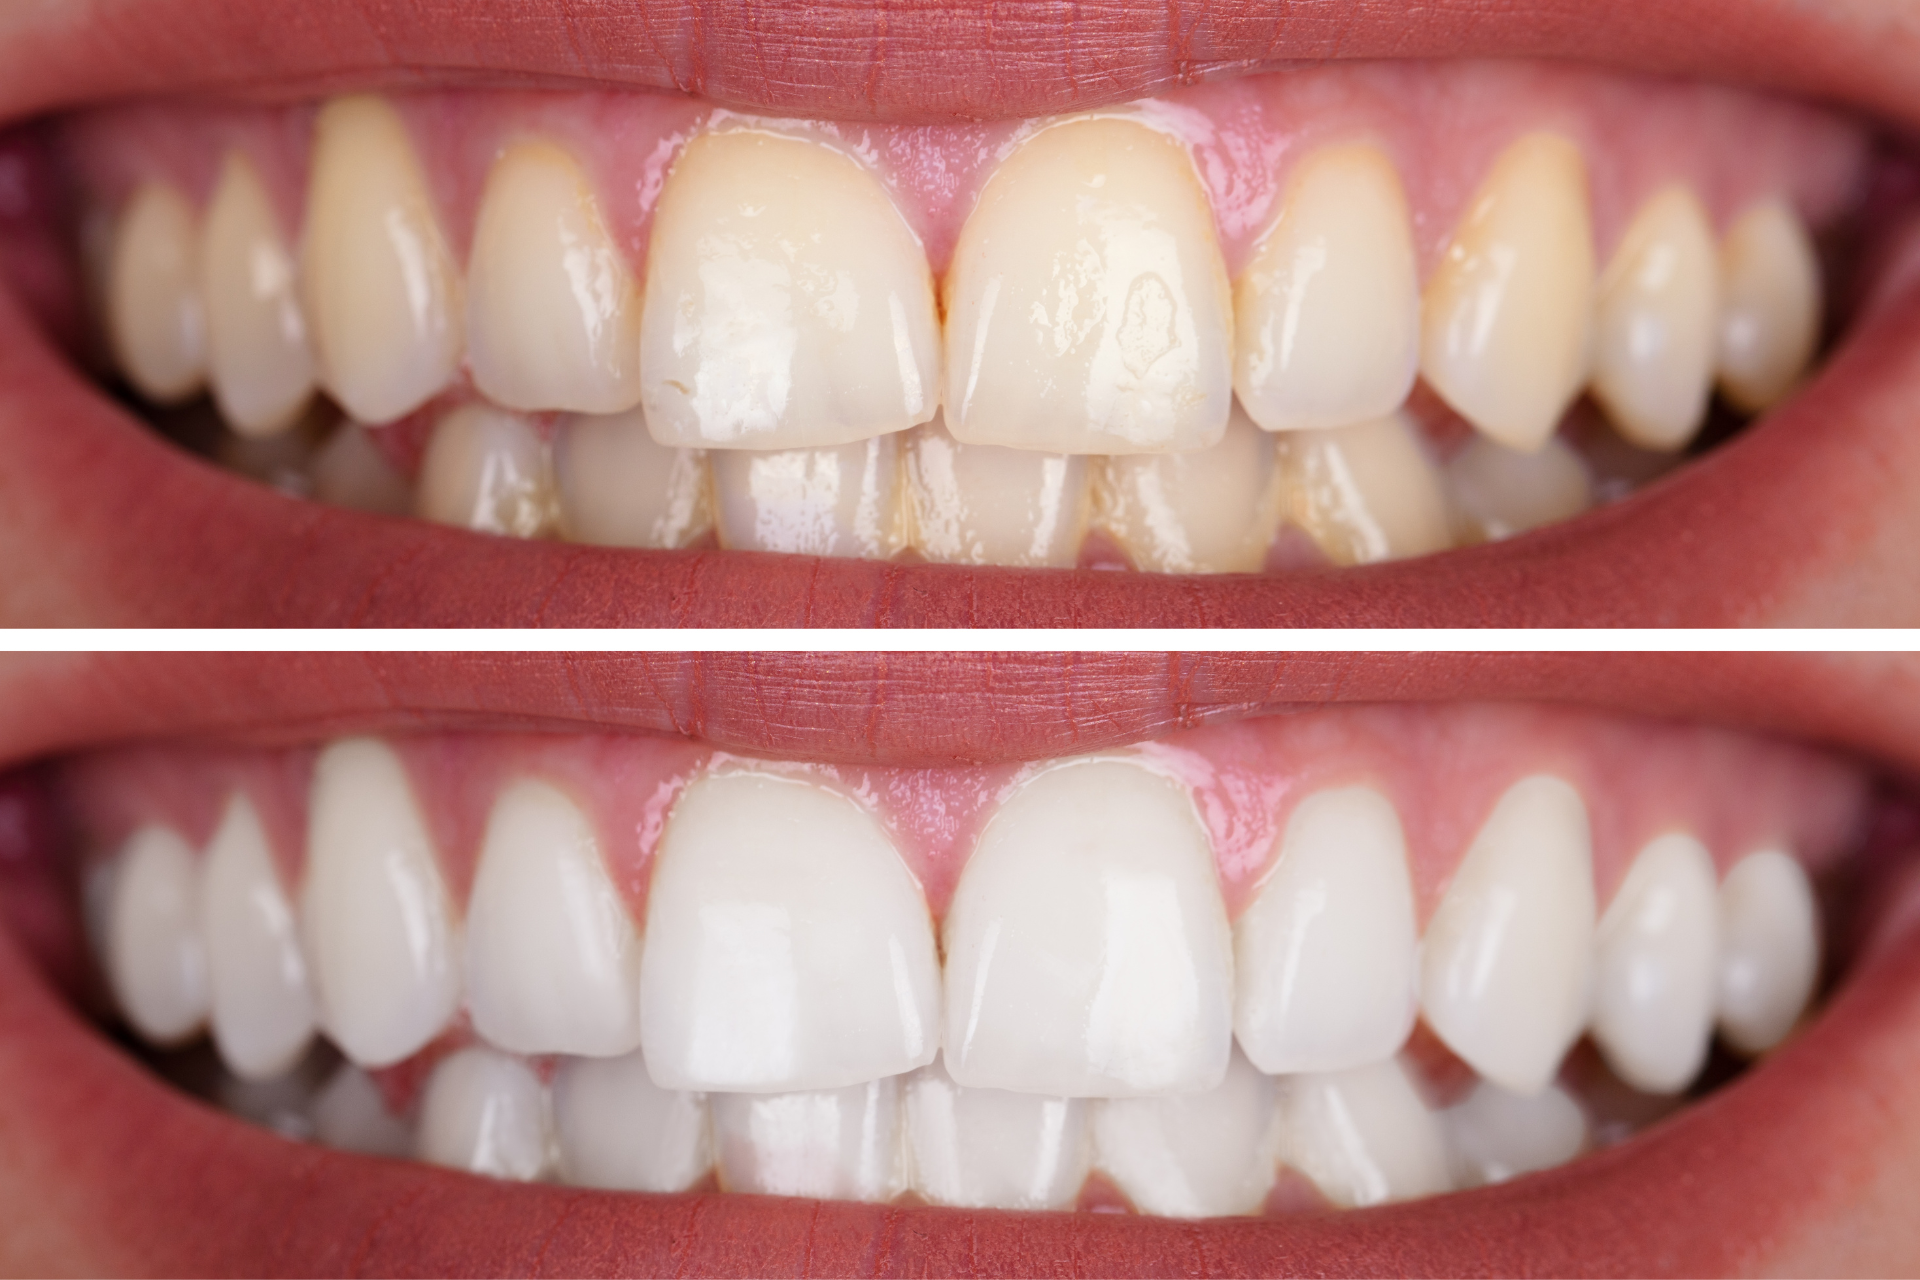 a before and after photo of a person 's teeth for teeth whitening.